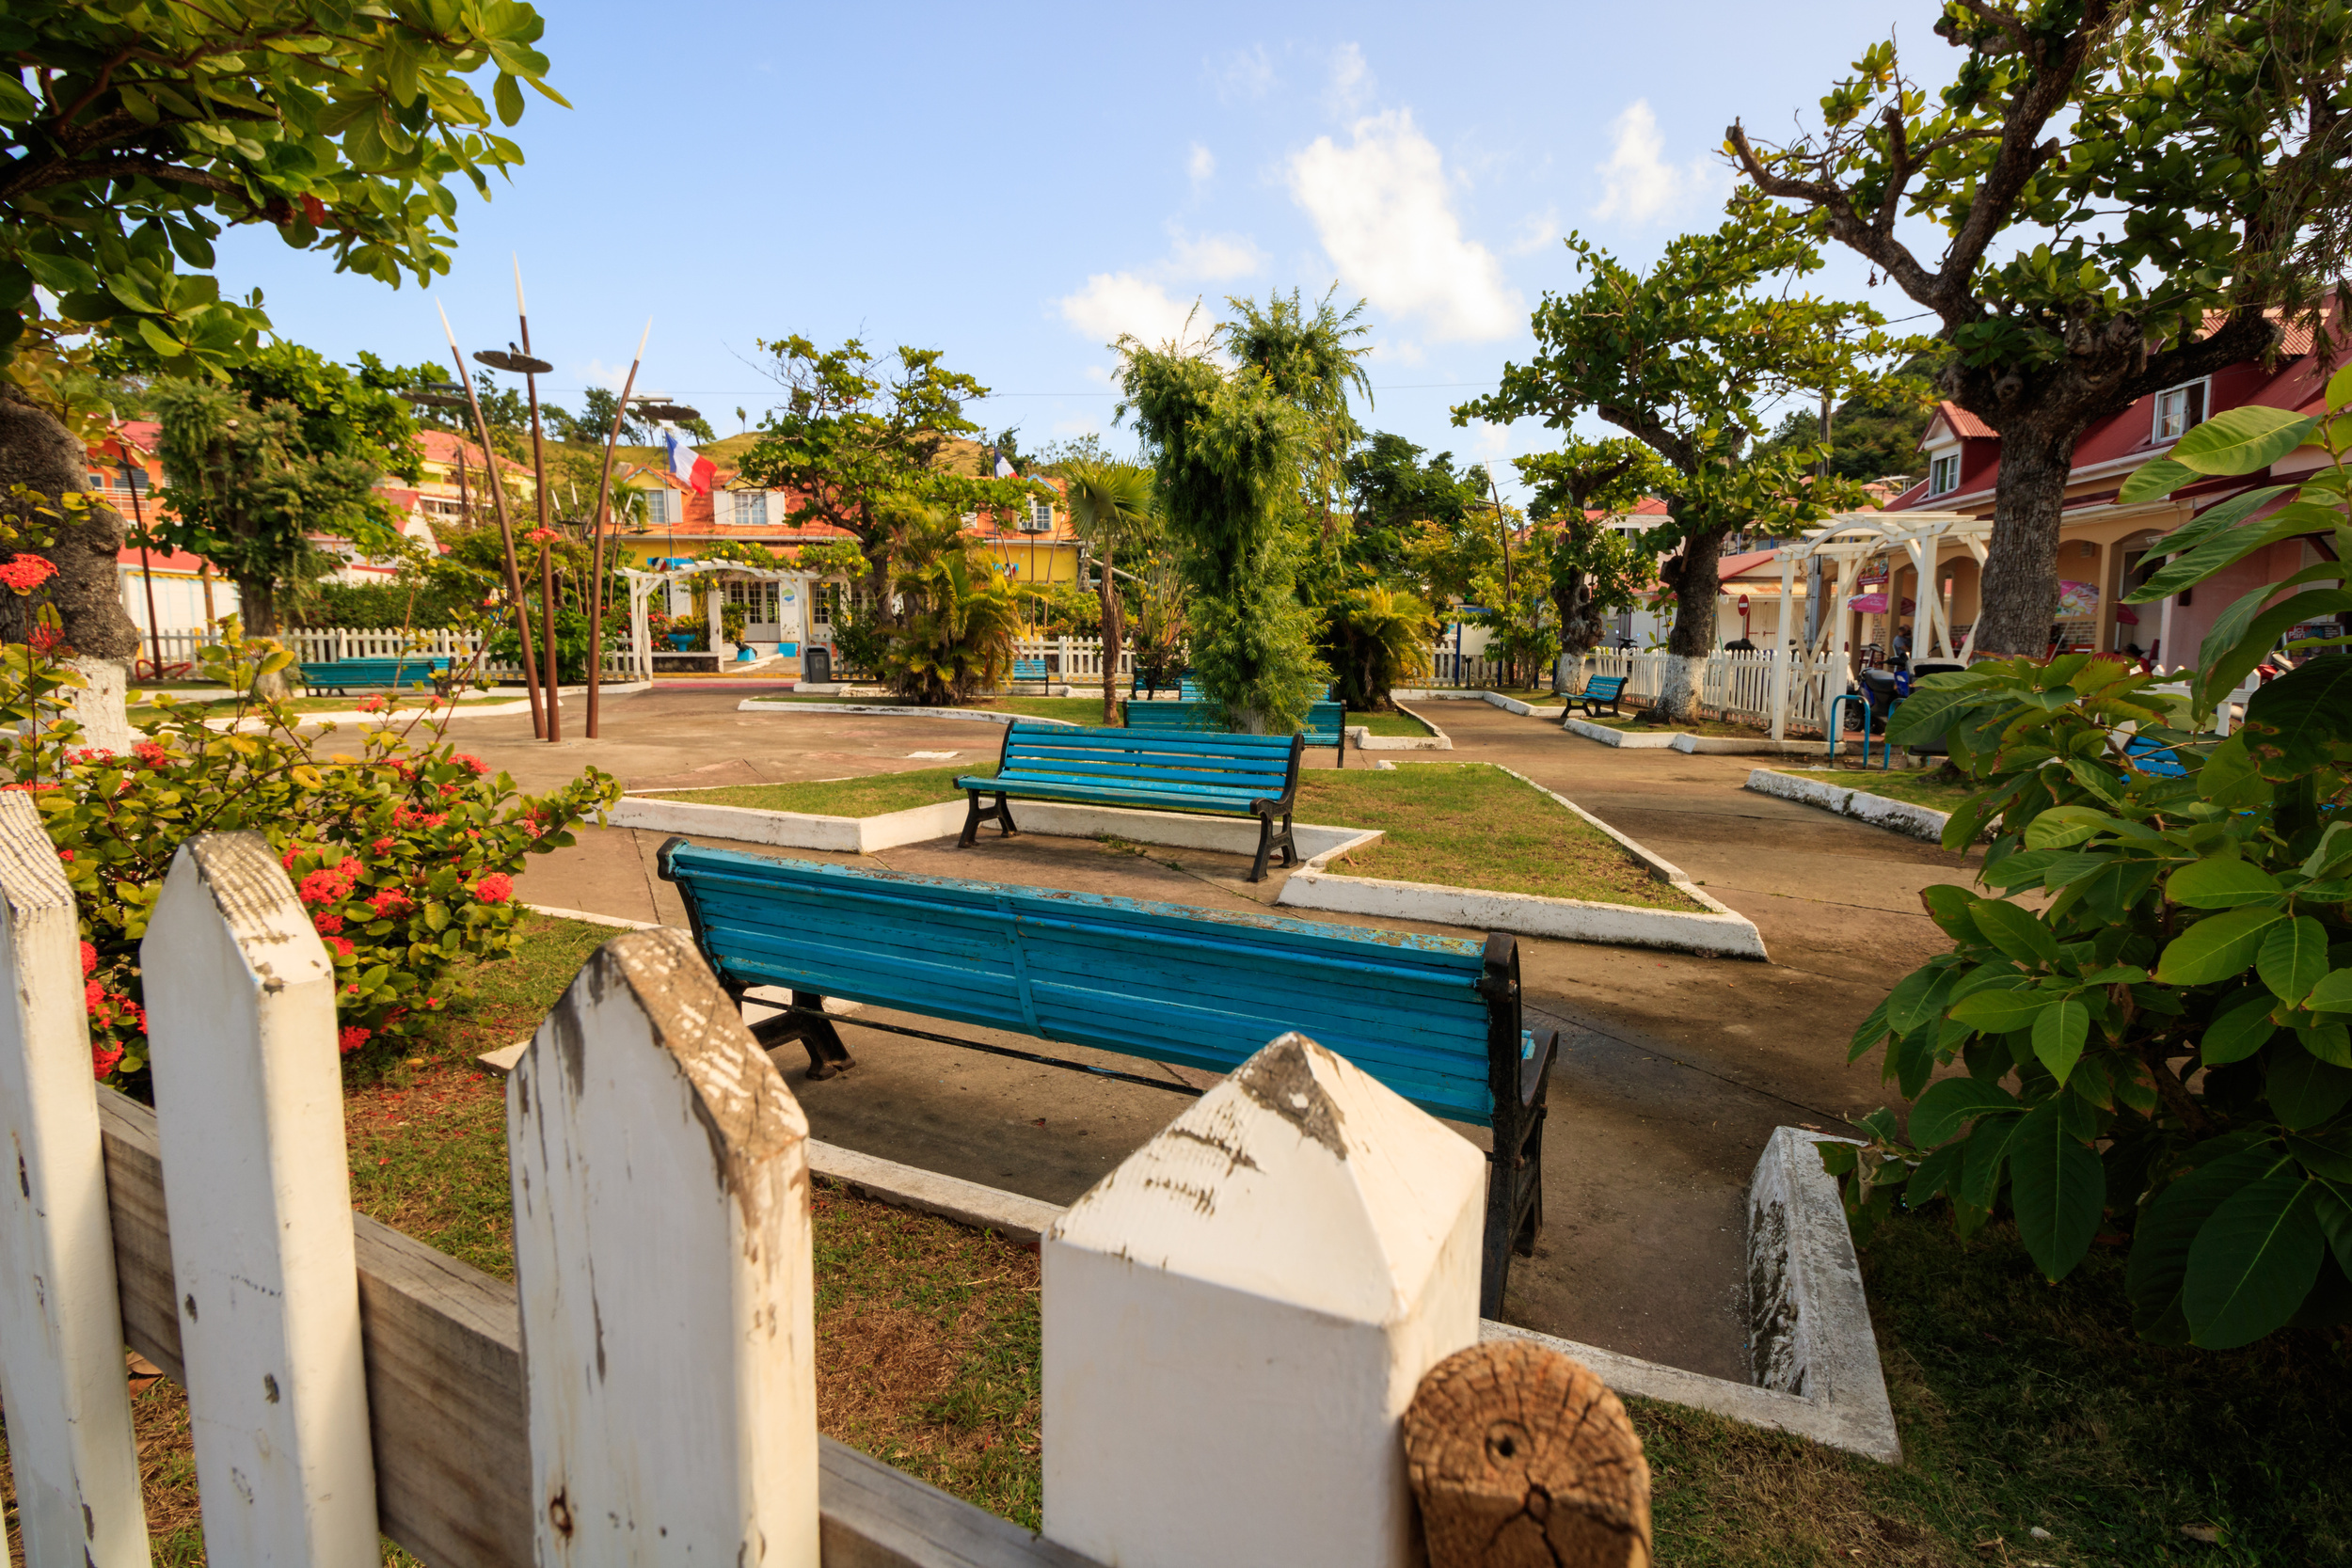 <p>Another current French Overseas Department first colonized by the Spanish, Guadalupe has French as its official language, but like Martinique, Creole is widely used by locals.</p><p><a href='https://www.msn.com/en-us/community/channel/vid-cj9pqbr0vn9in2b6ddcd8sfgpfq6x6utp44fssrv6mc2gtybw0us'>Follow us on MSN to see more of our exclusive lifestyle content.</a></p>